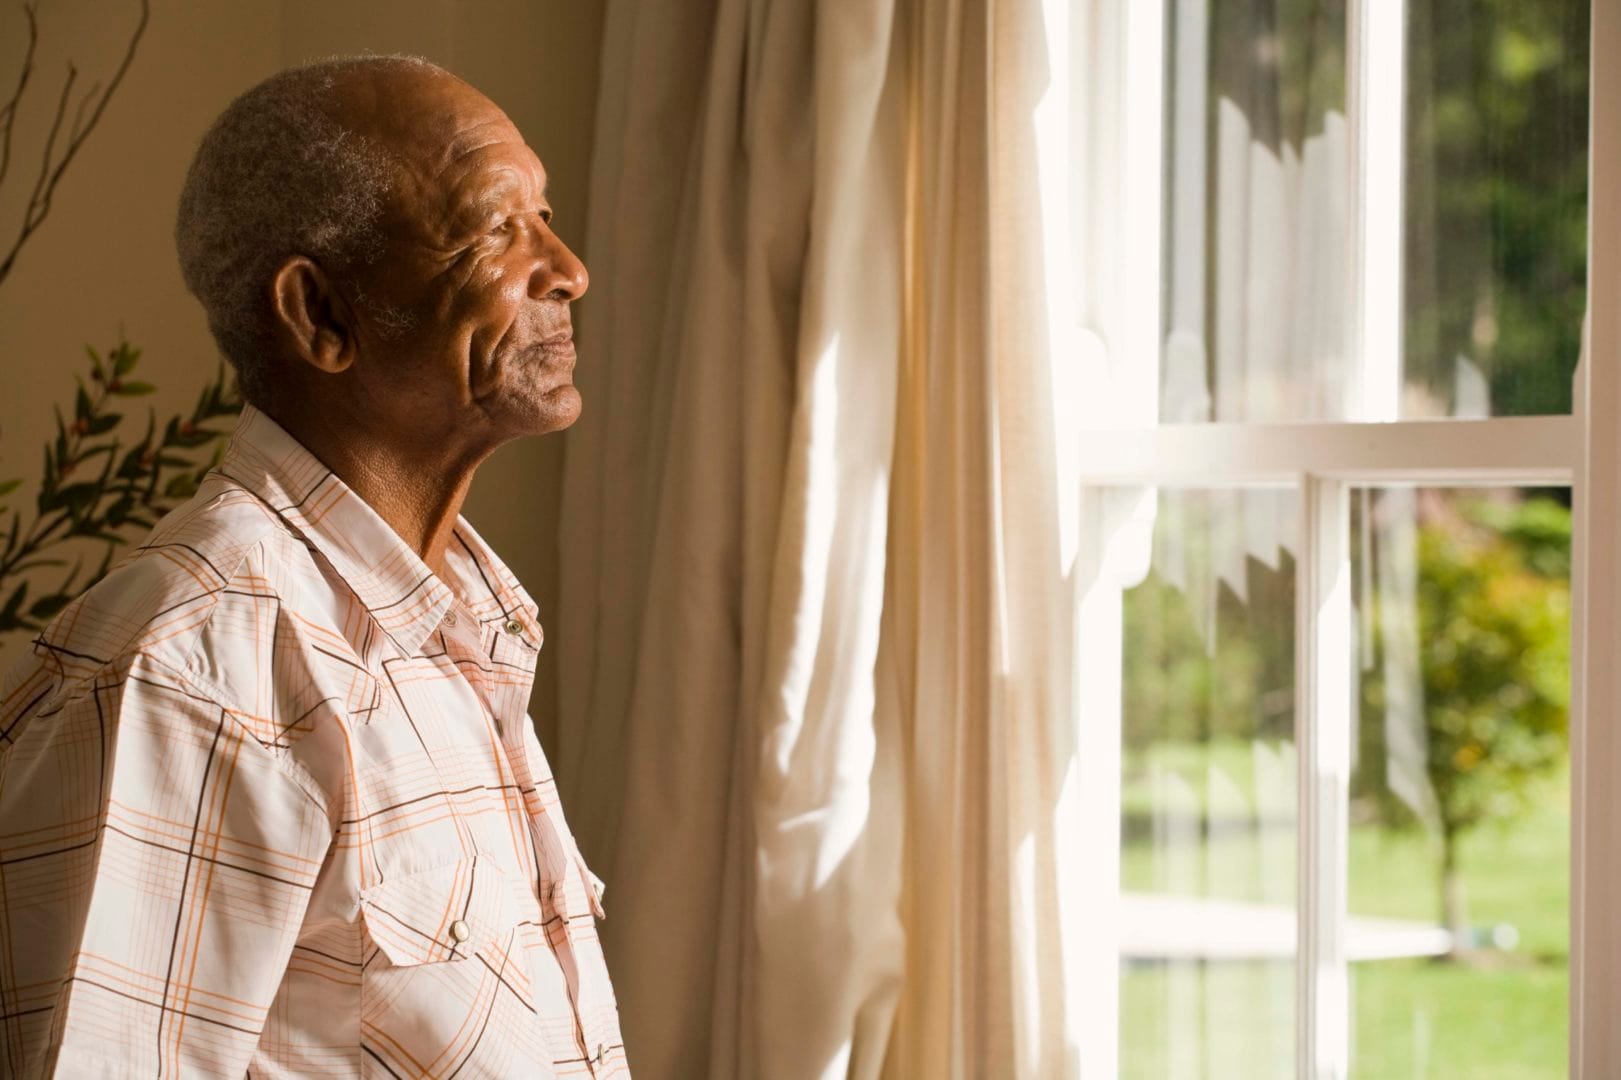 Remote monitoring for seniors: How to find the option that’s best for you